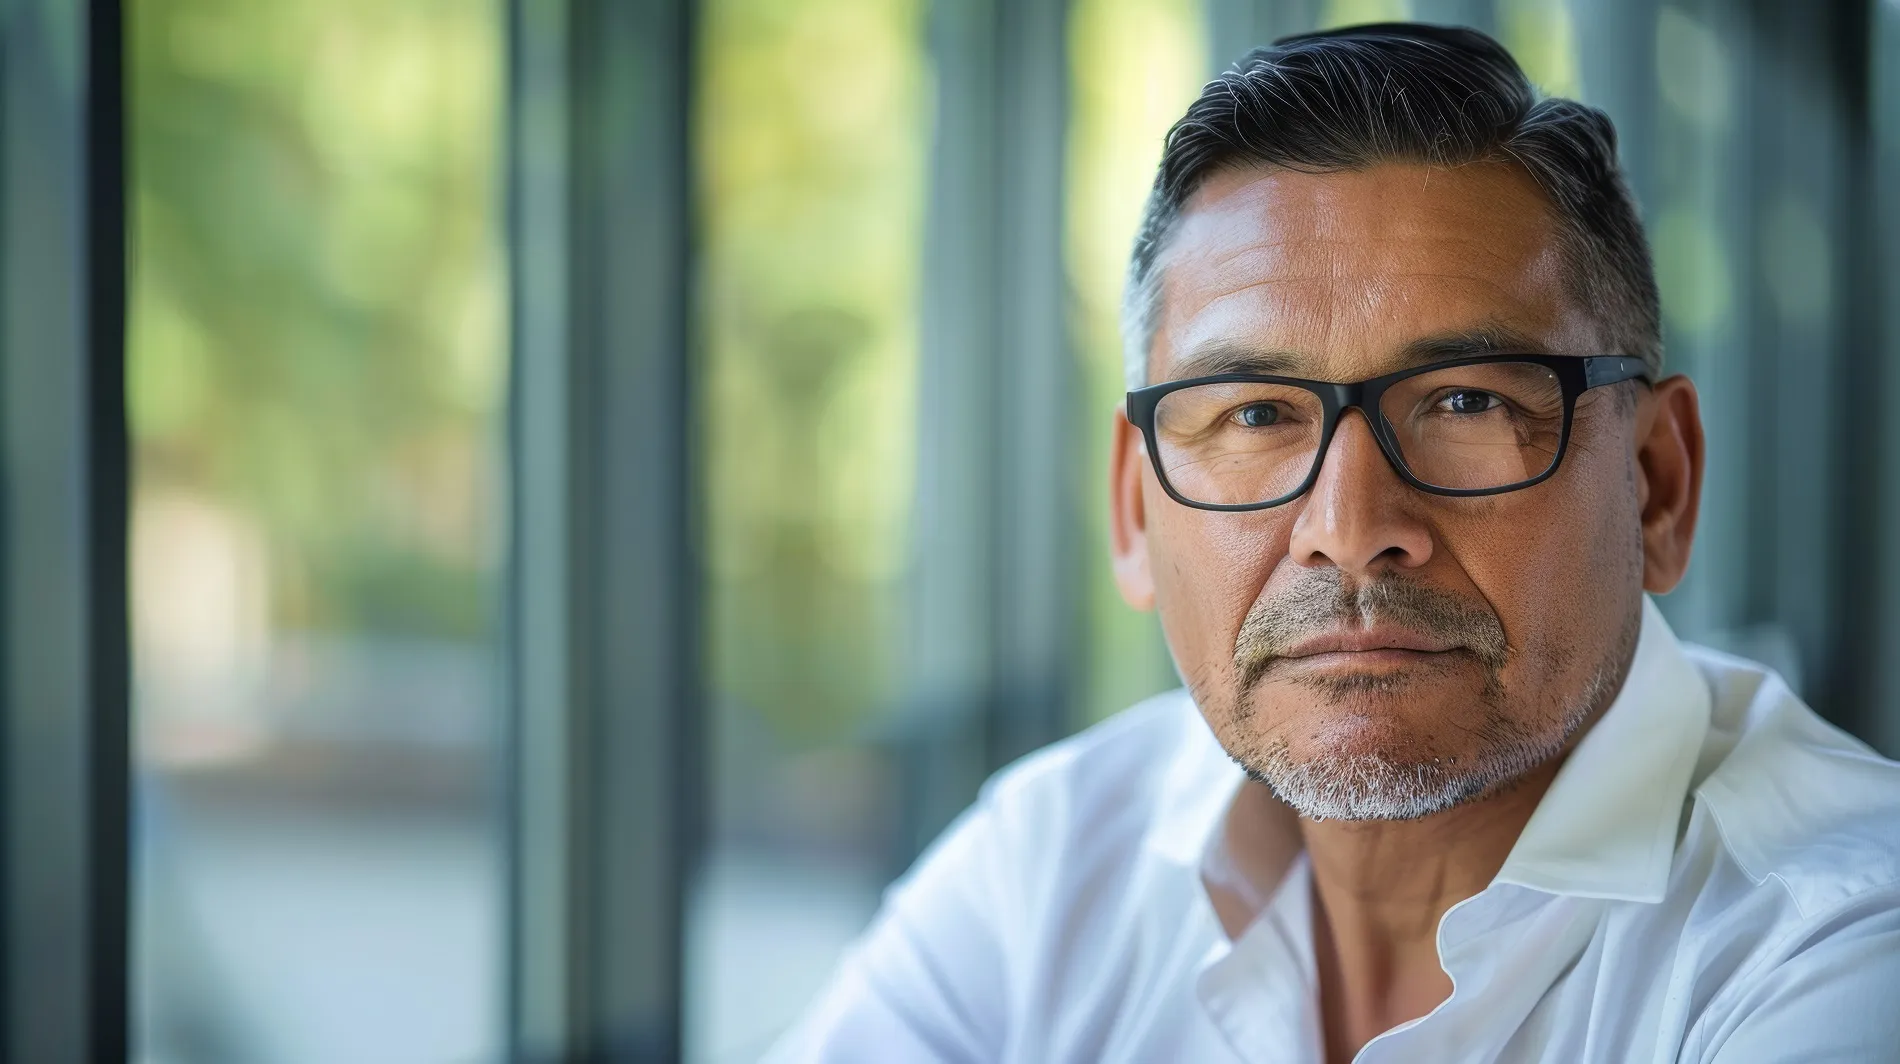 A man with glasses and short hair, wearing a white shirt, looks directly at the camera with a calm expression. In the blurred background, large windows reveal greenery outside, evoking the serene landscapes cherished by Tribal Nations.